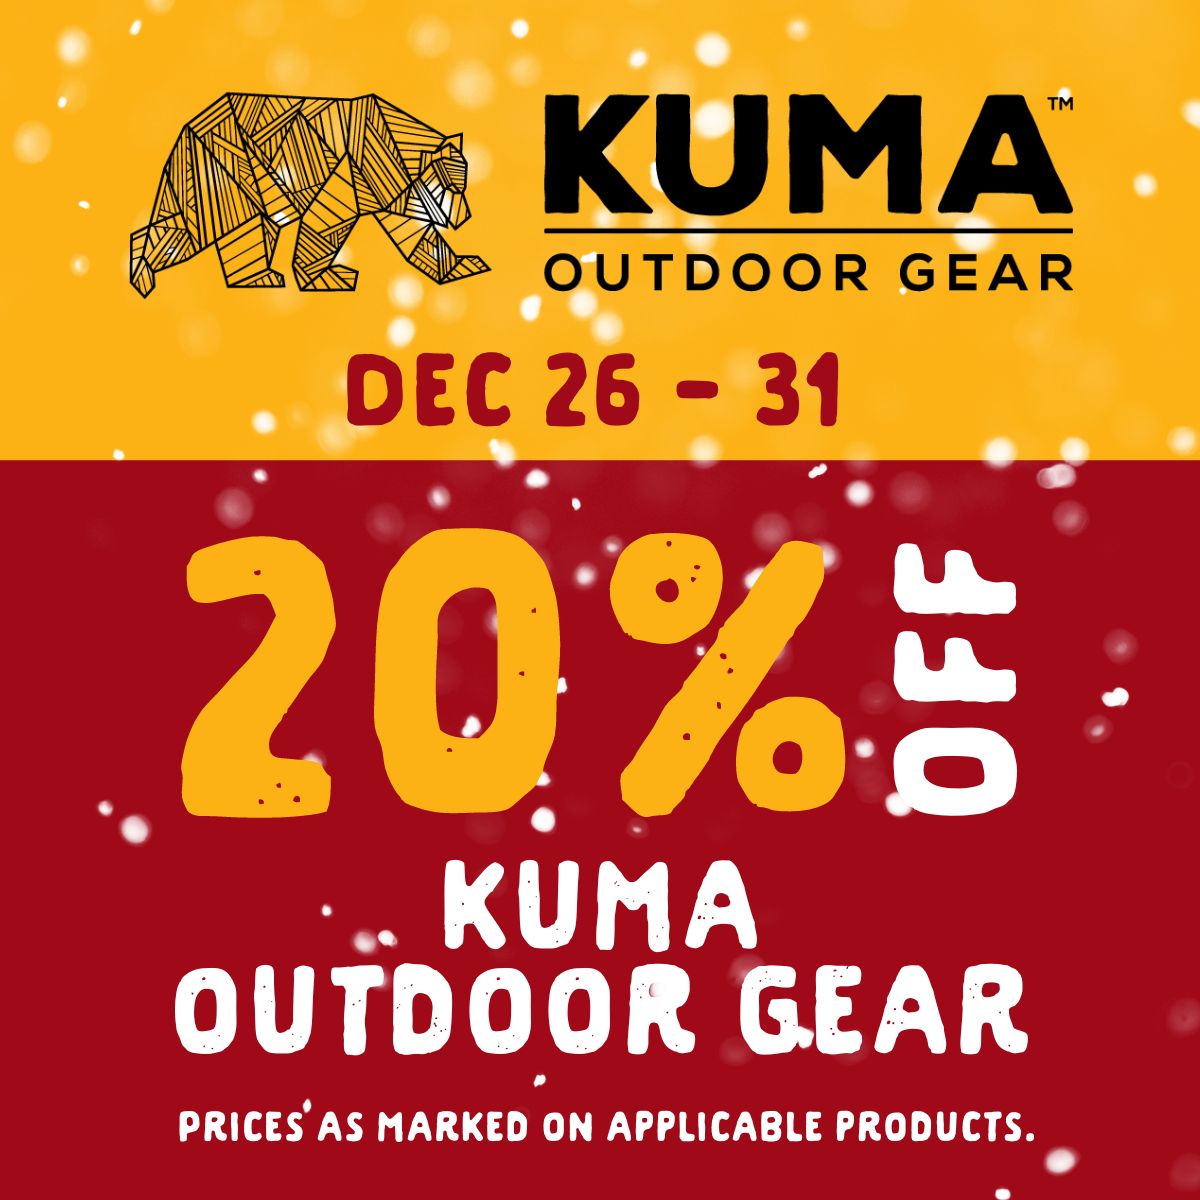 20% off Kuma Outdoor Gear from December 26 to 31. Prices as marked on applicable products.